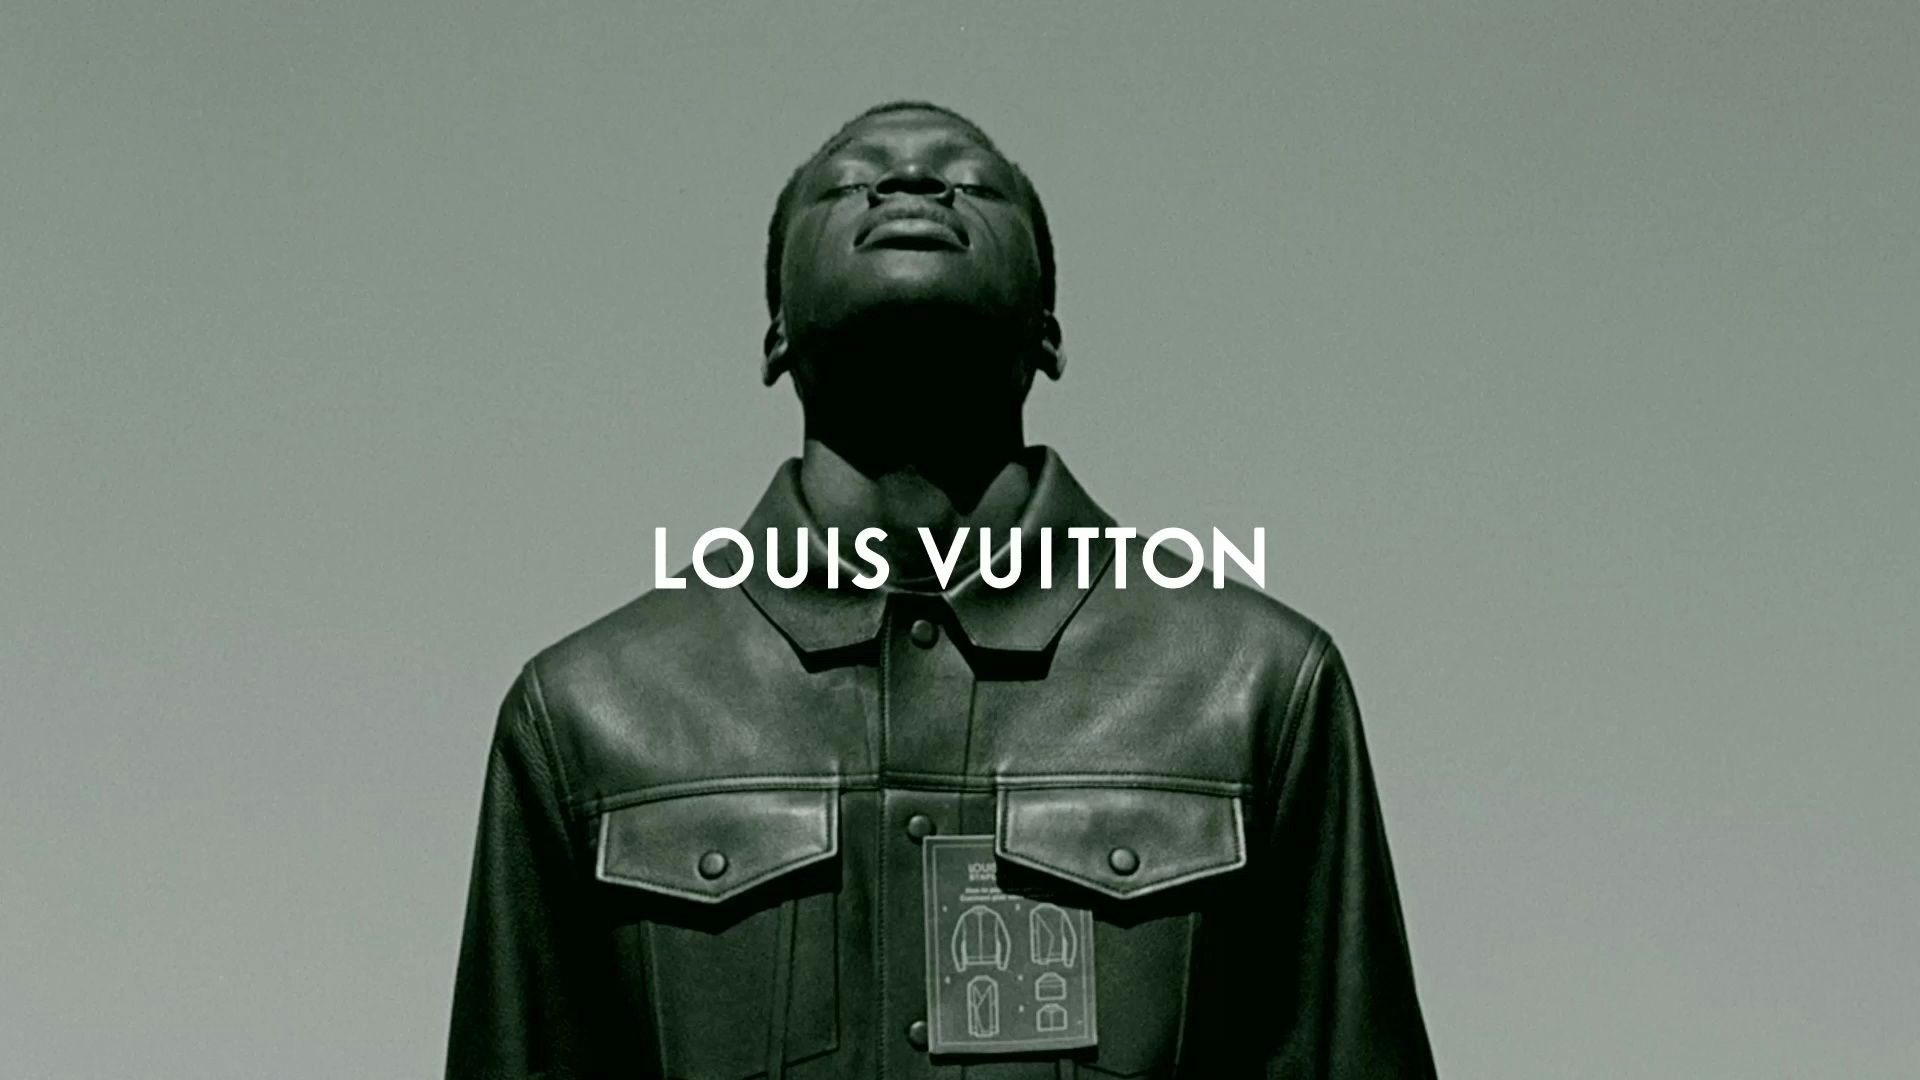 Louis Vuitton Men’s SS19 Campaign title card and "compassion" close up of model